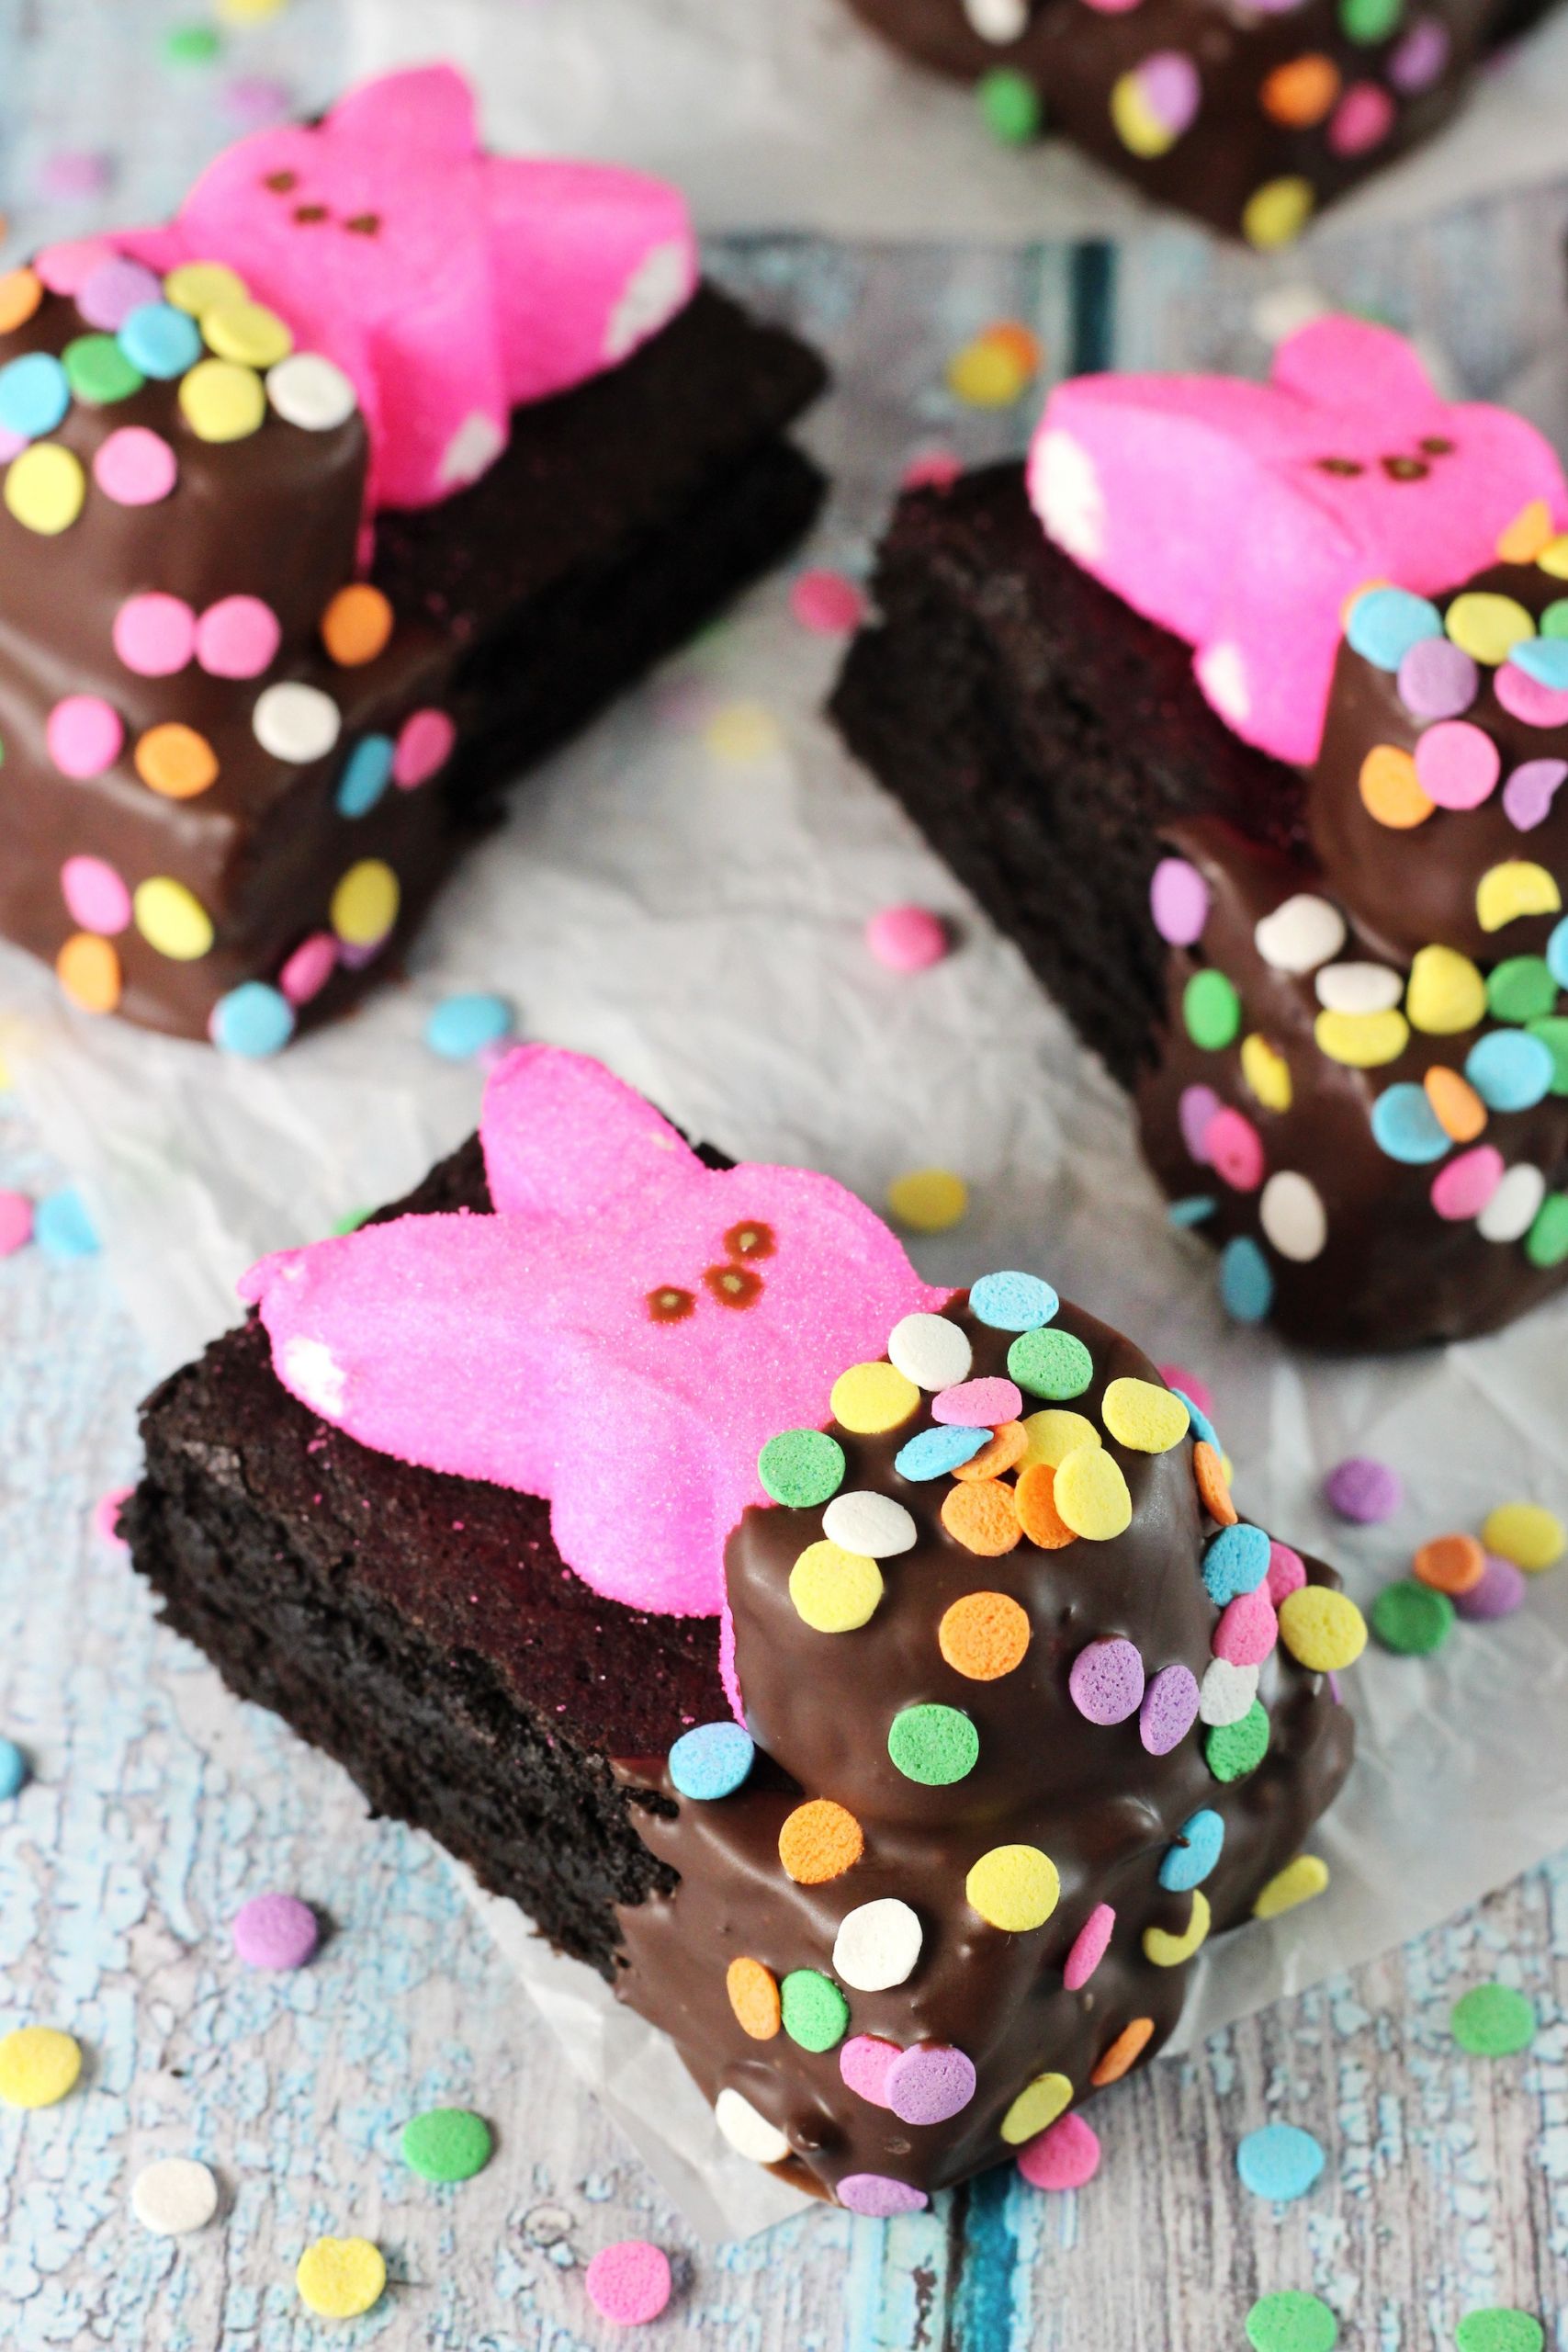 Easter Bunny Desserts Lovely 11 Easy Easter Desserts that are Almost too Adorable to